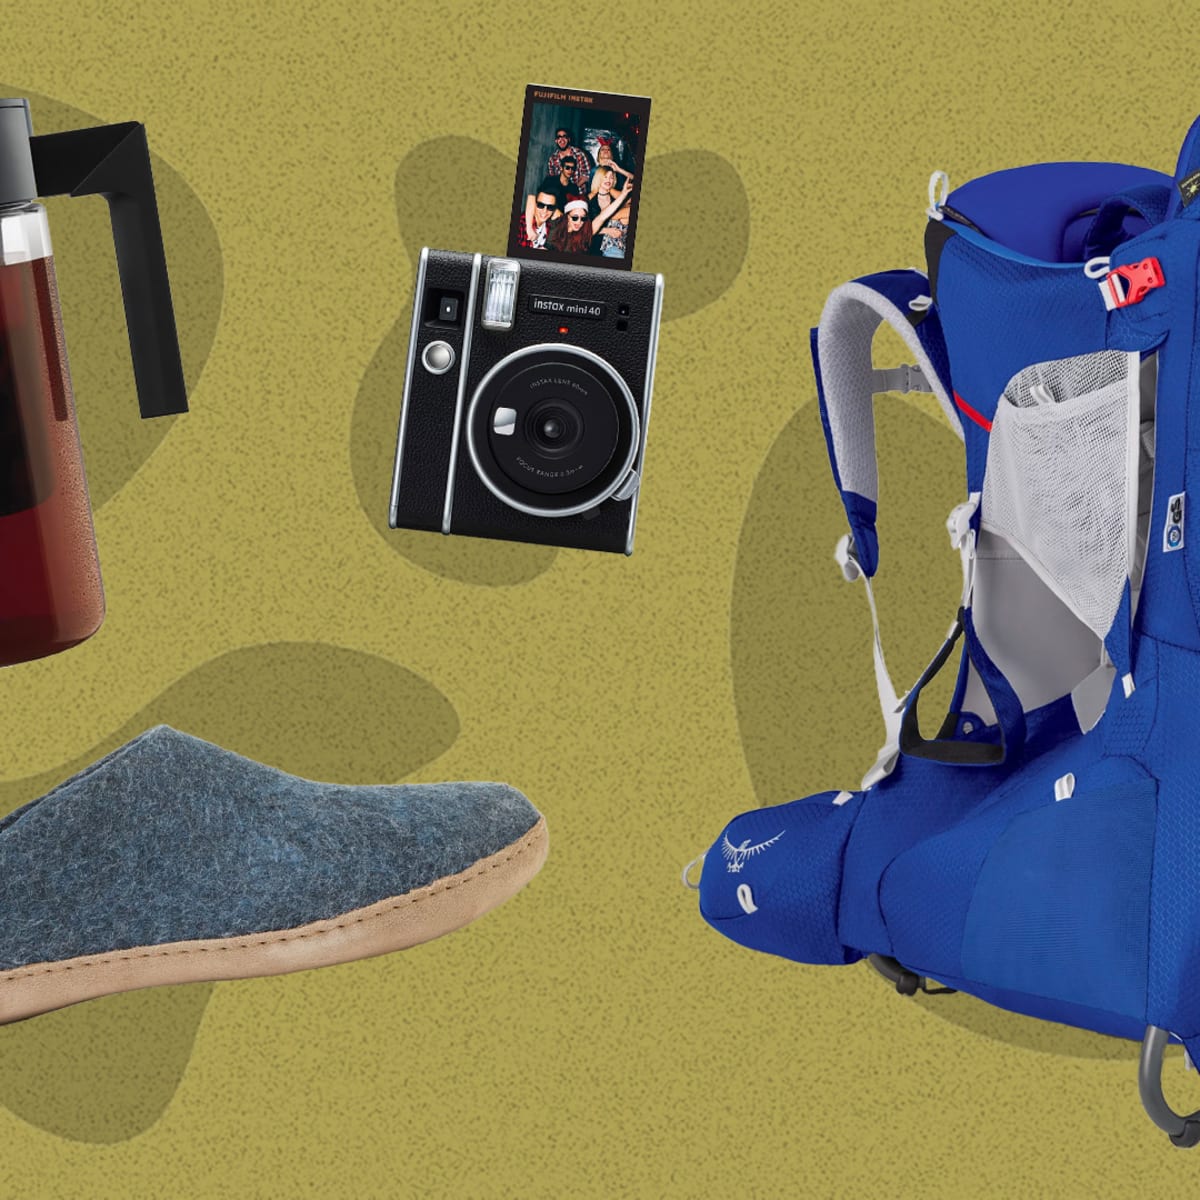 Father's Day 2023: Best Gift Ideas to Make Dad Feel Special